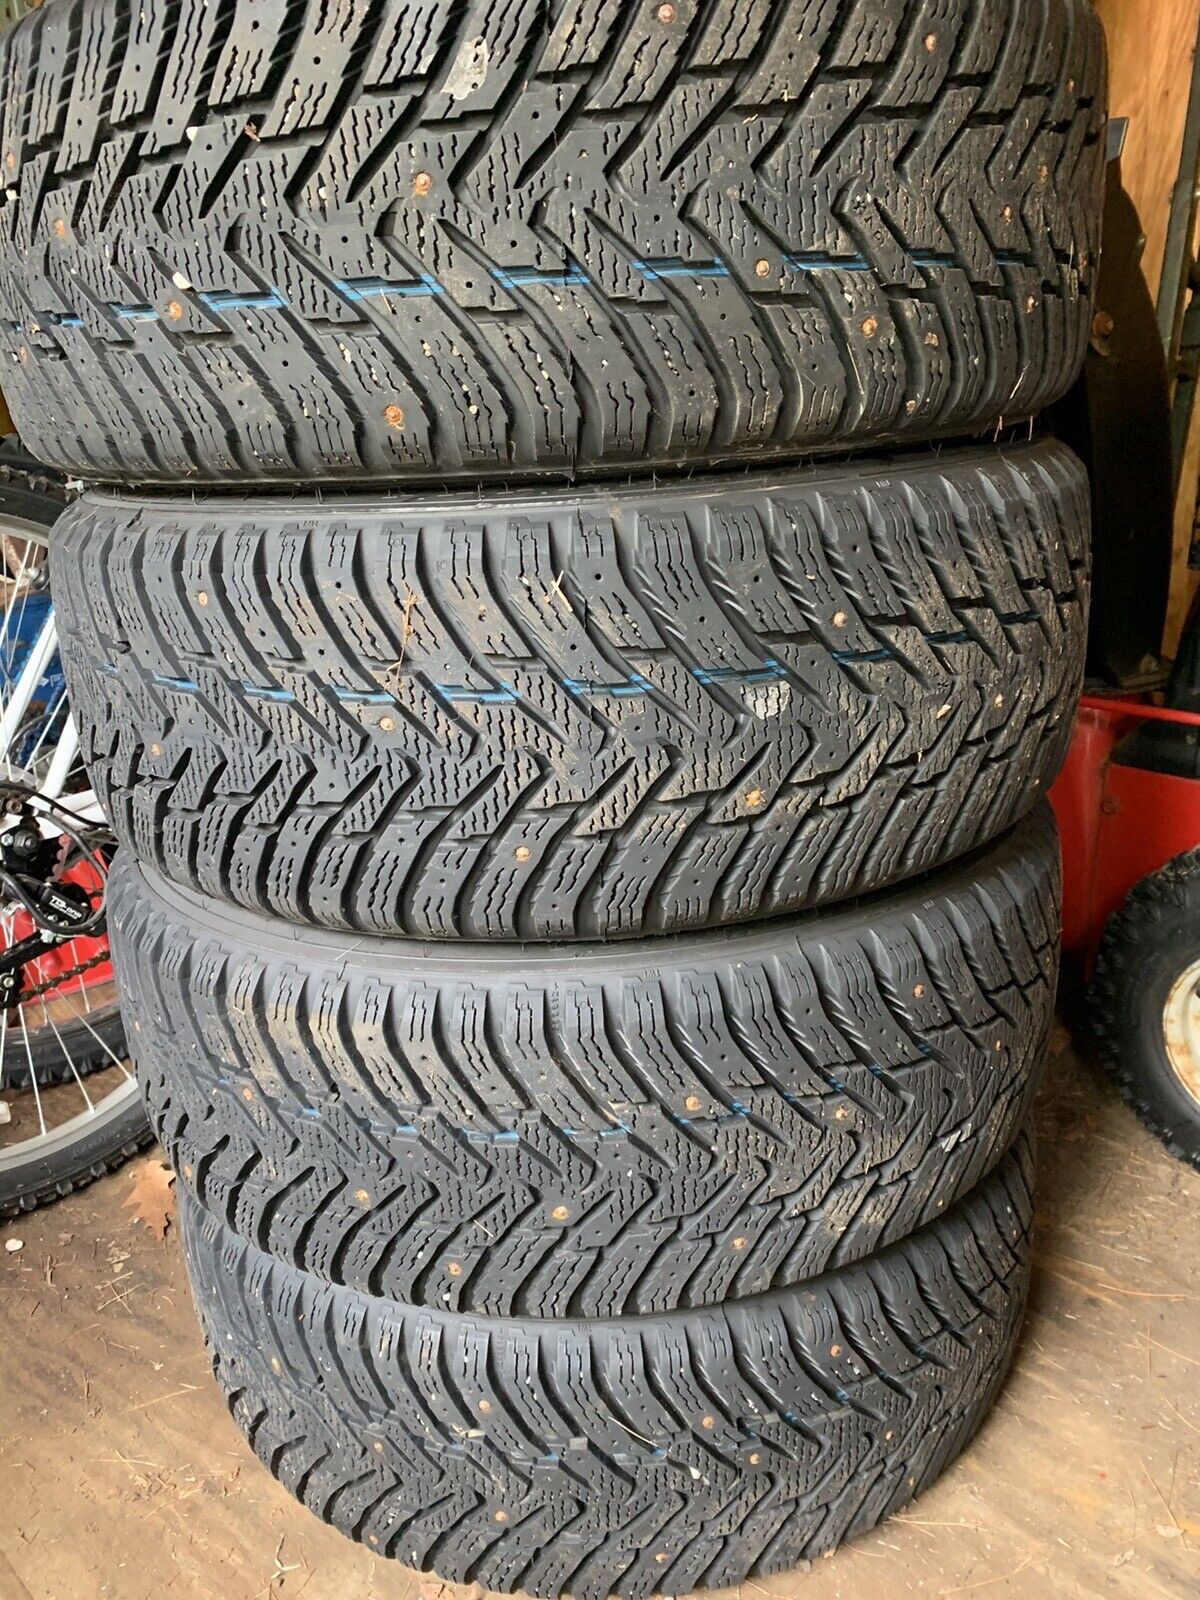 06-11 civic Wheels And Snow Tires 205/55/16